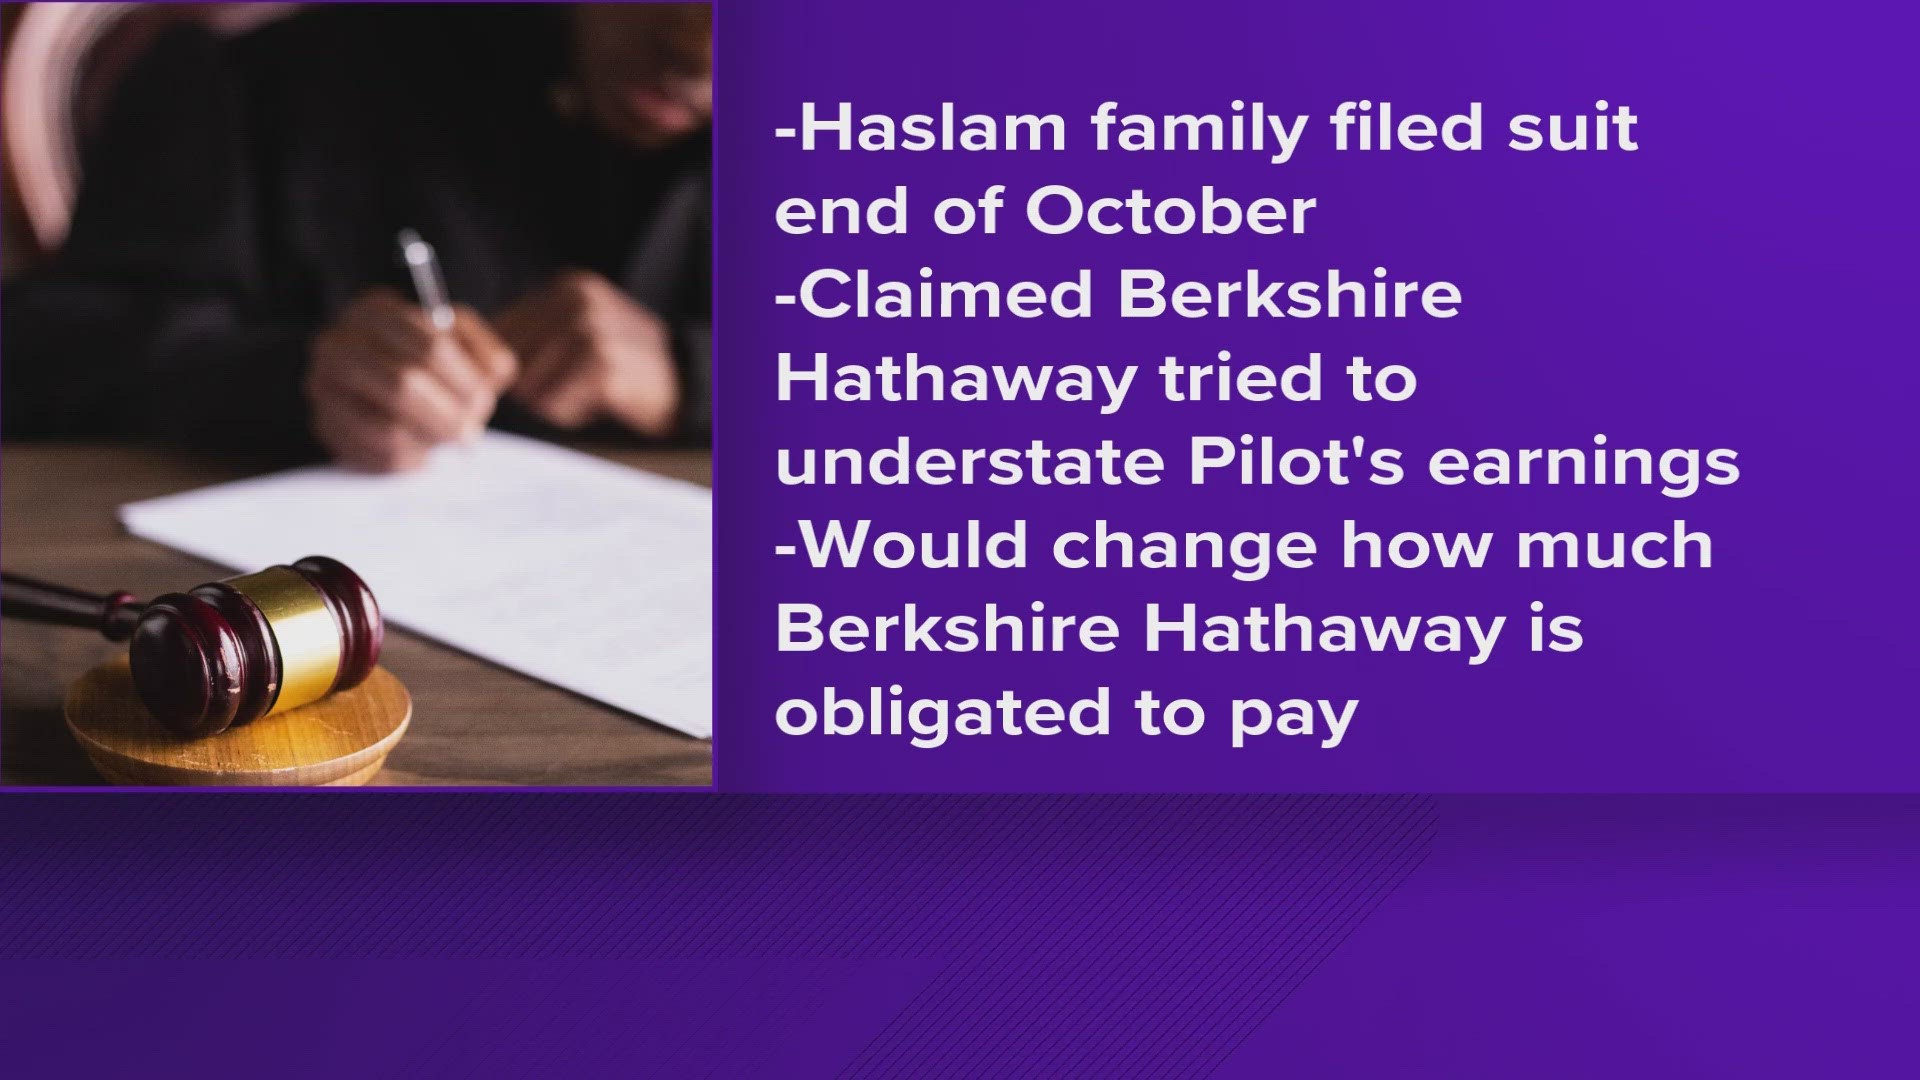 The Haslam family filed a lawsuit at the end of October saying Berkshire Hathaway tried to understate Pilot's earnings this year by changing its accounting practice.